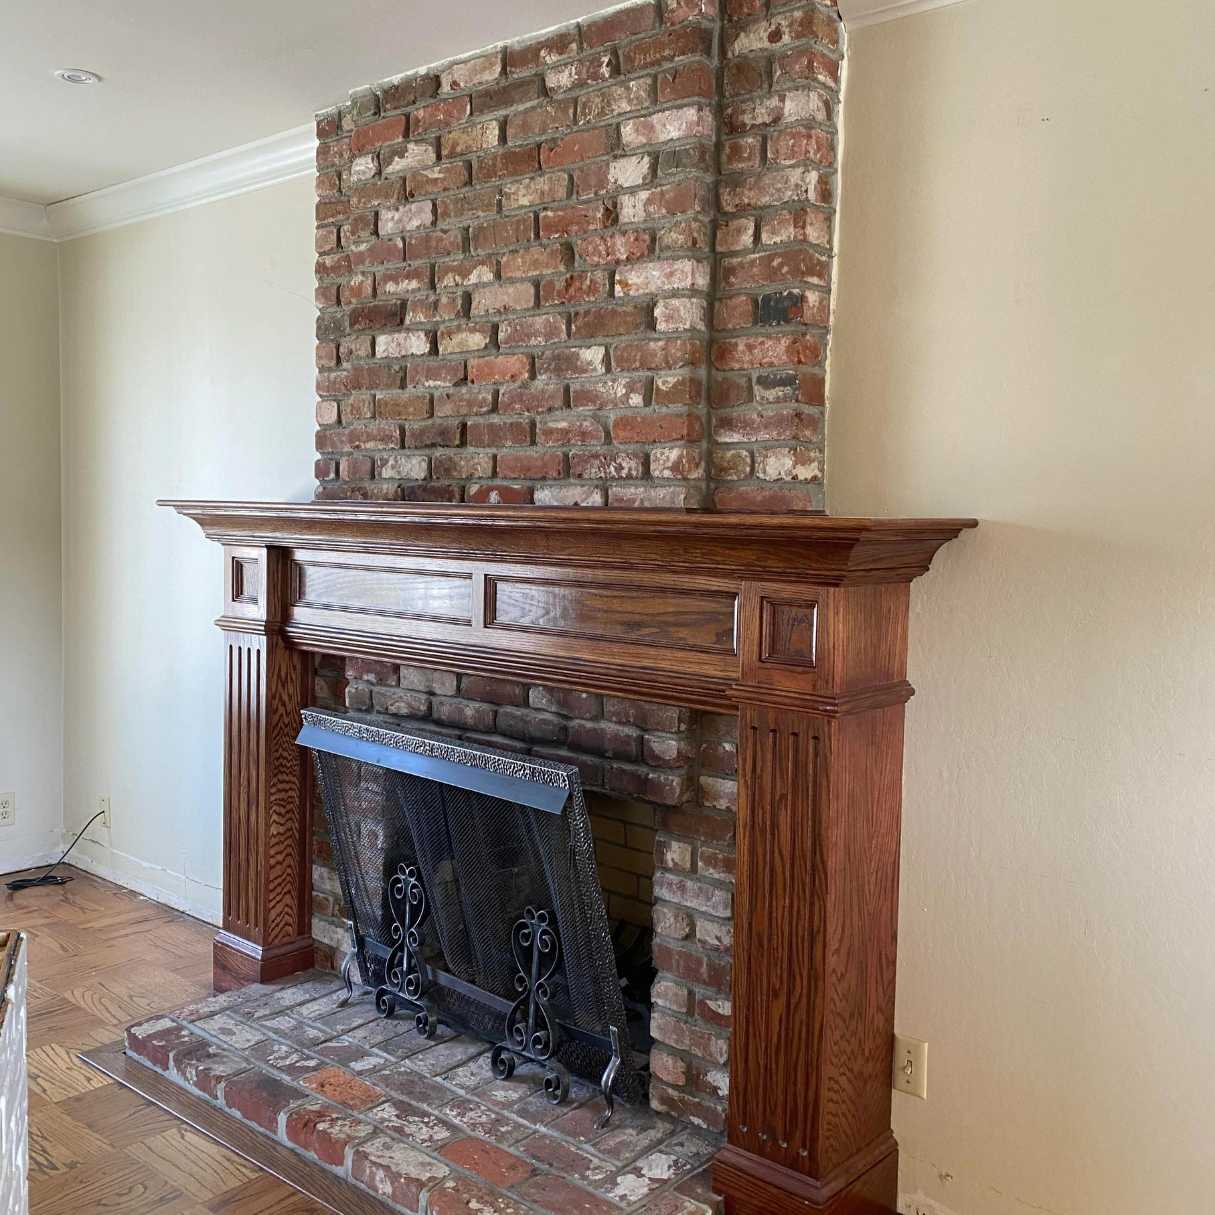 How To Cover A Brick Fireplace | Storables